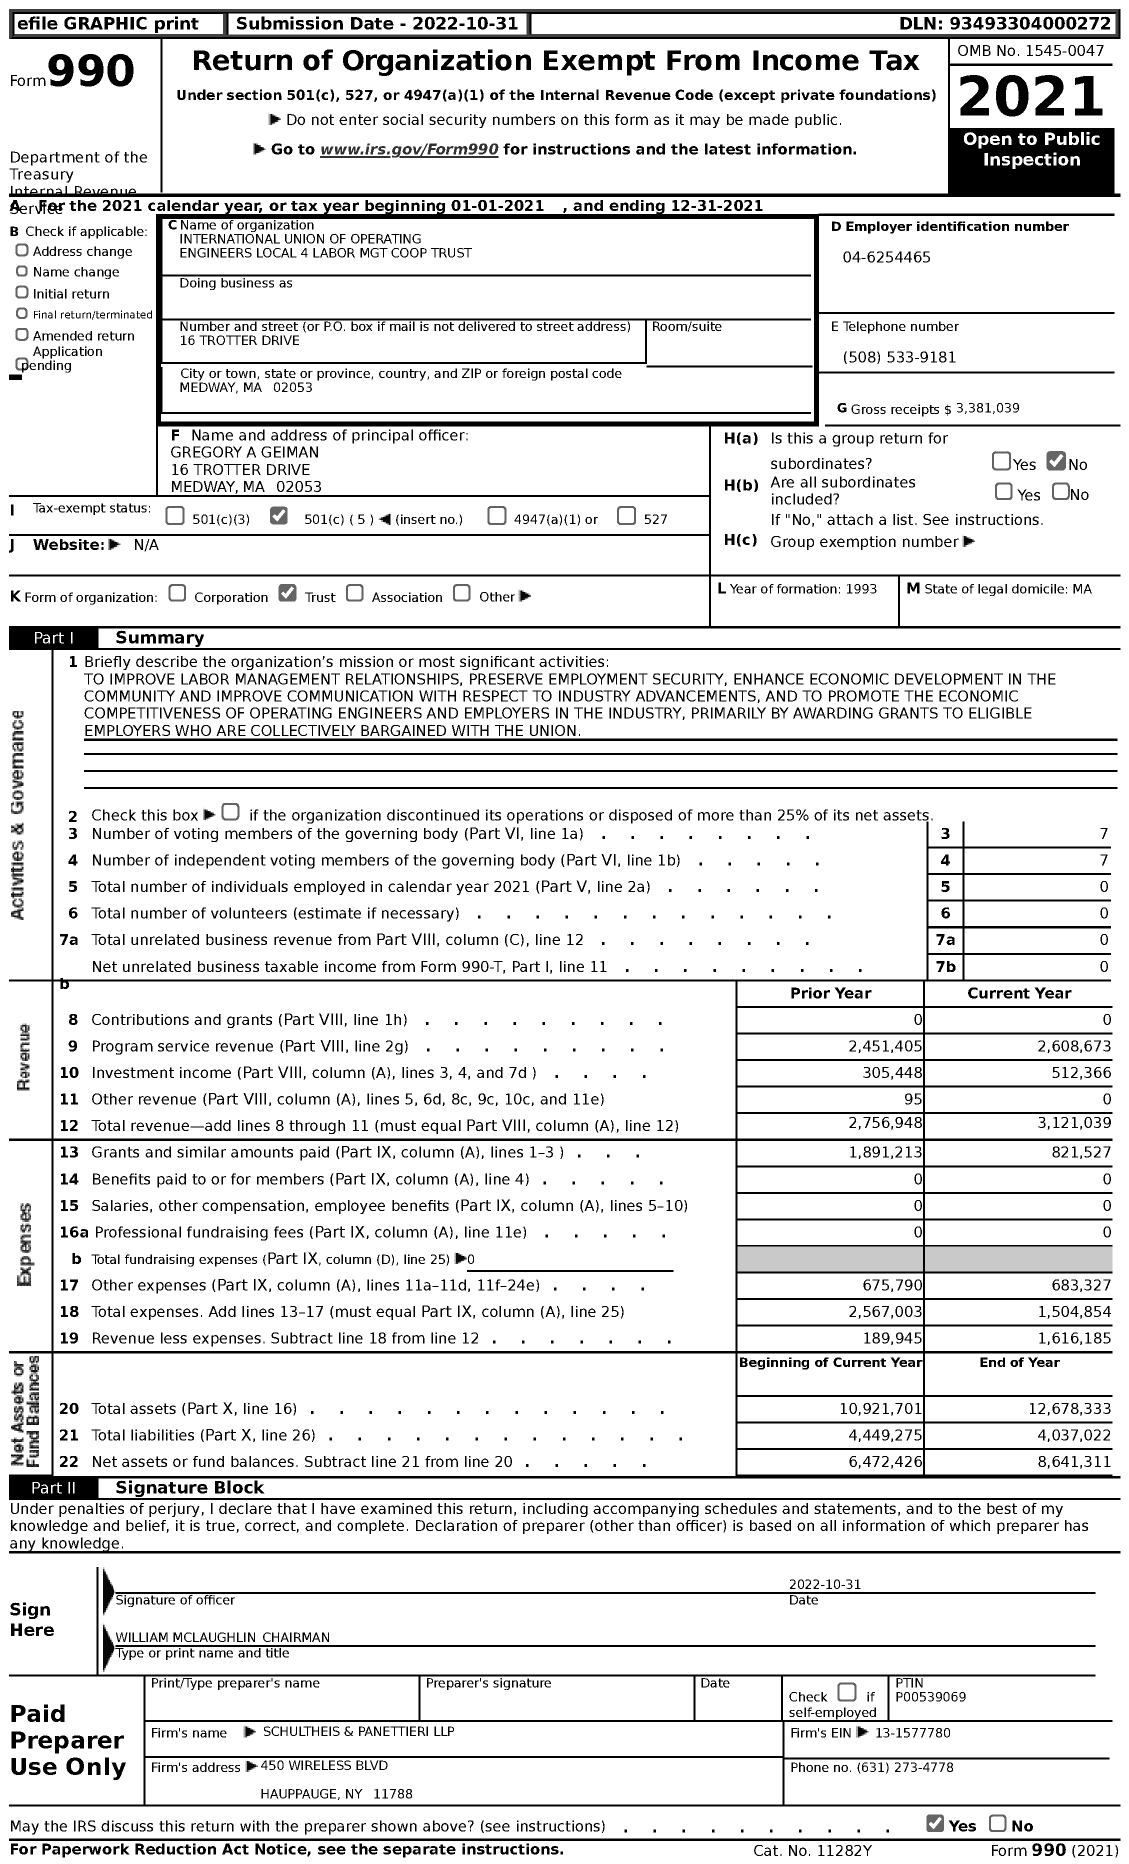 Image of first page of 2021 Form 990 for International Union of Operating Engineers Local 4 Labor MGT Coop Trust